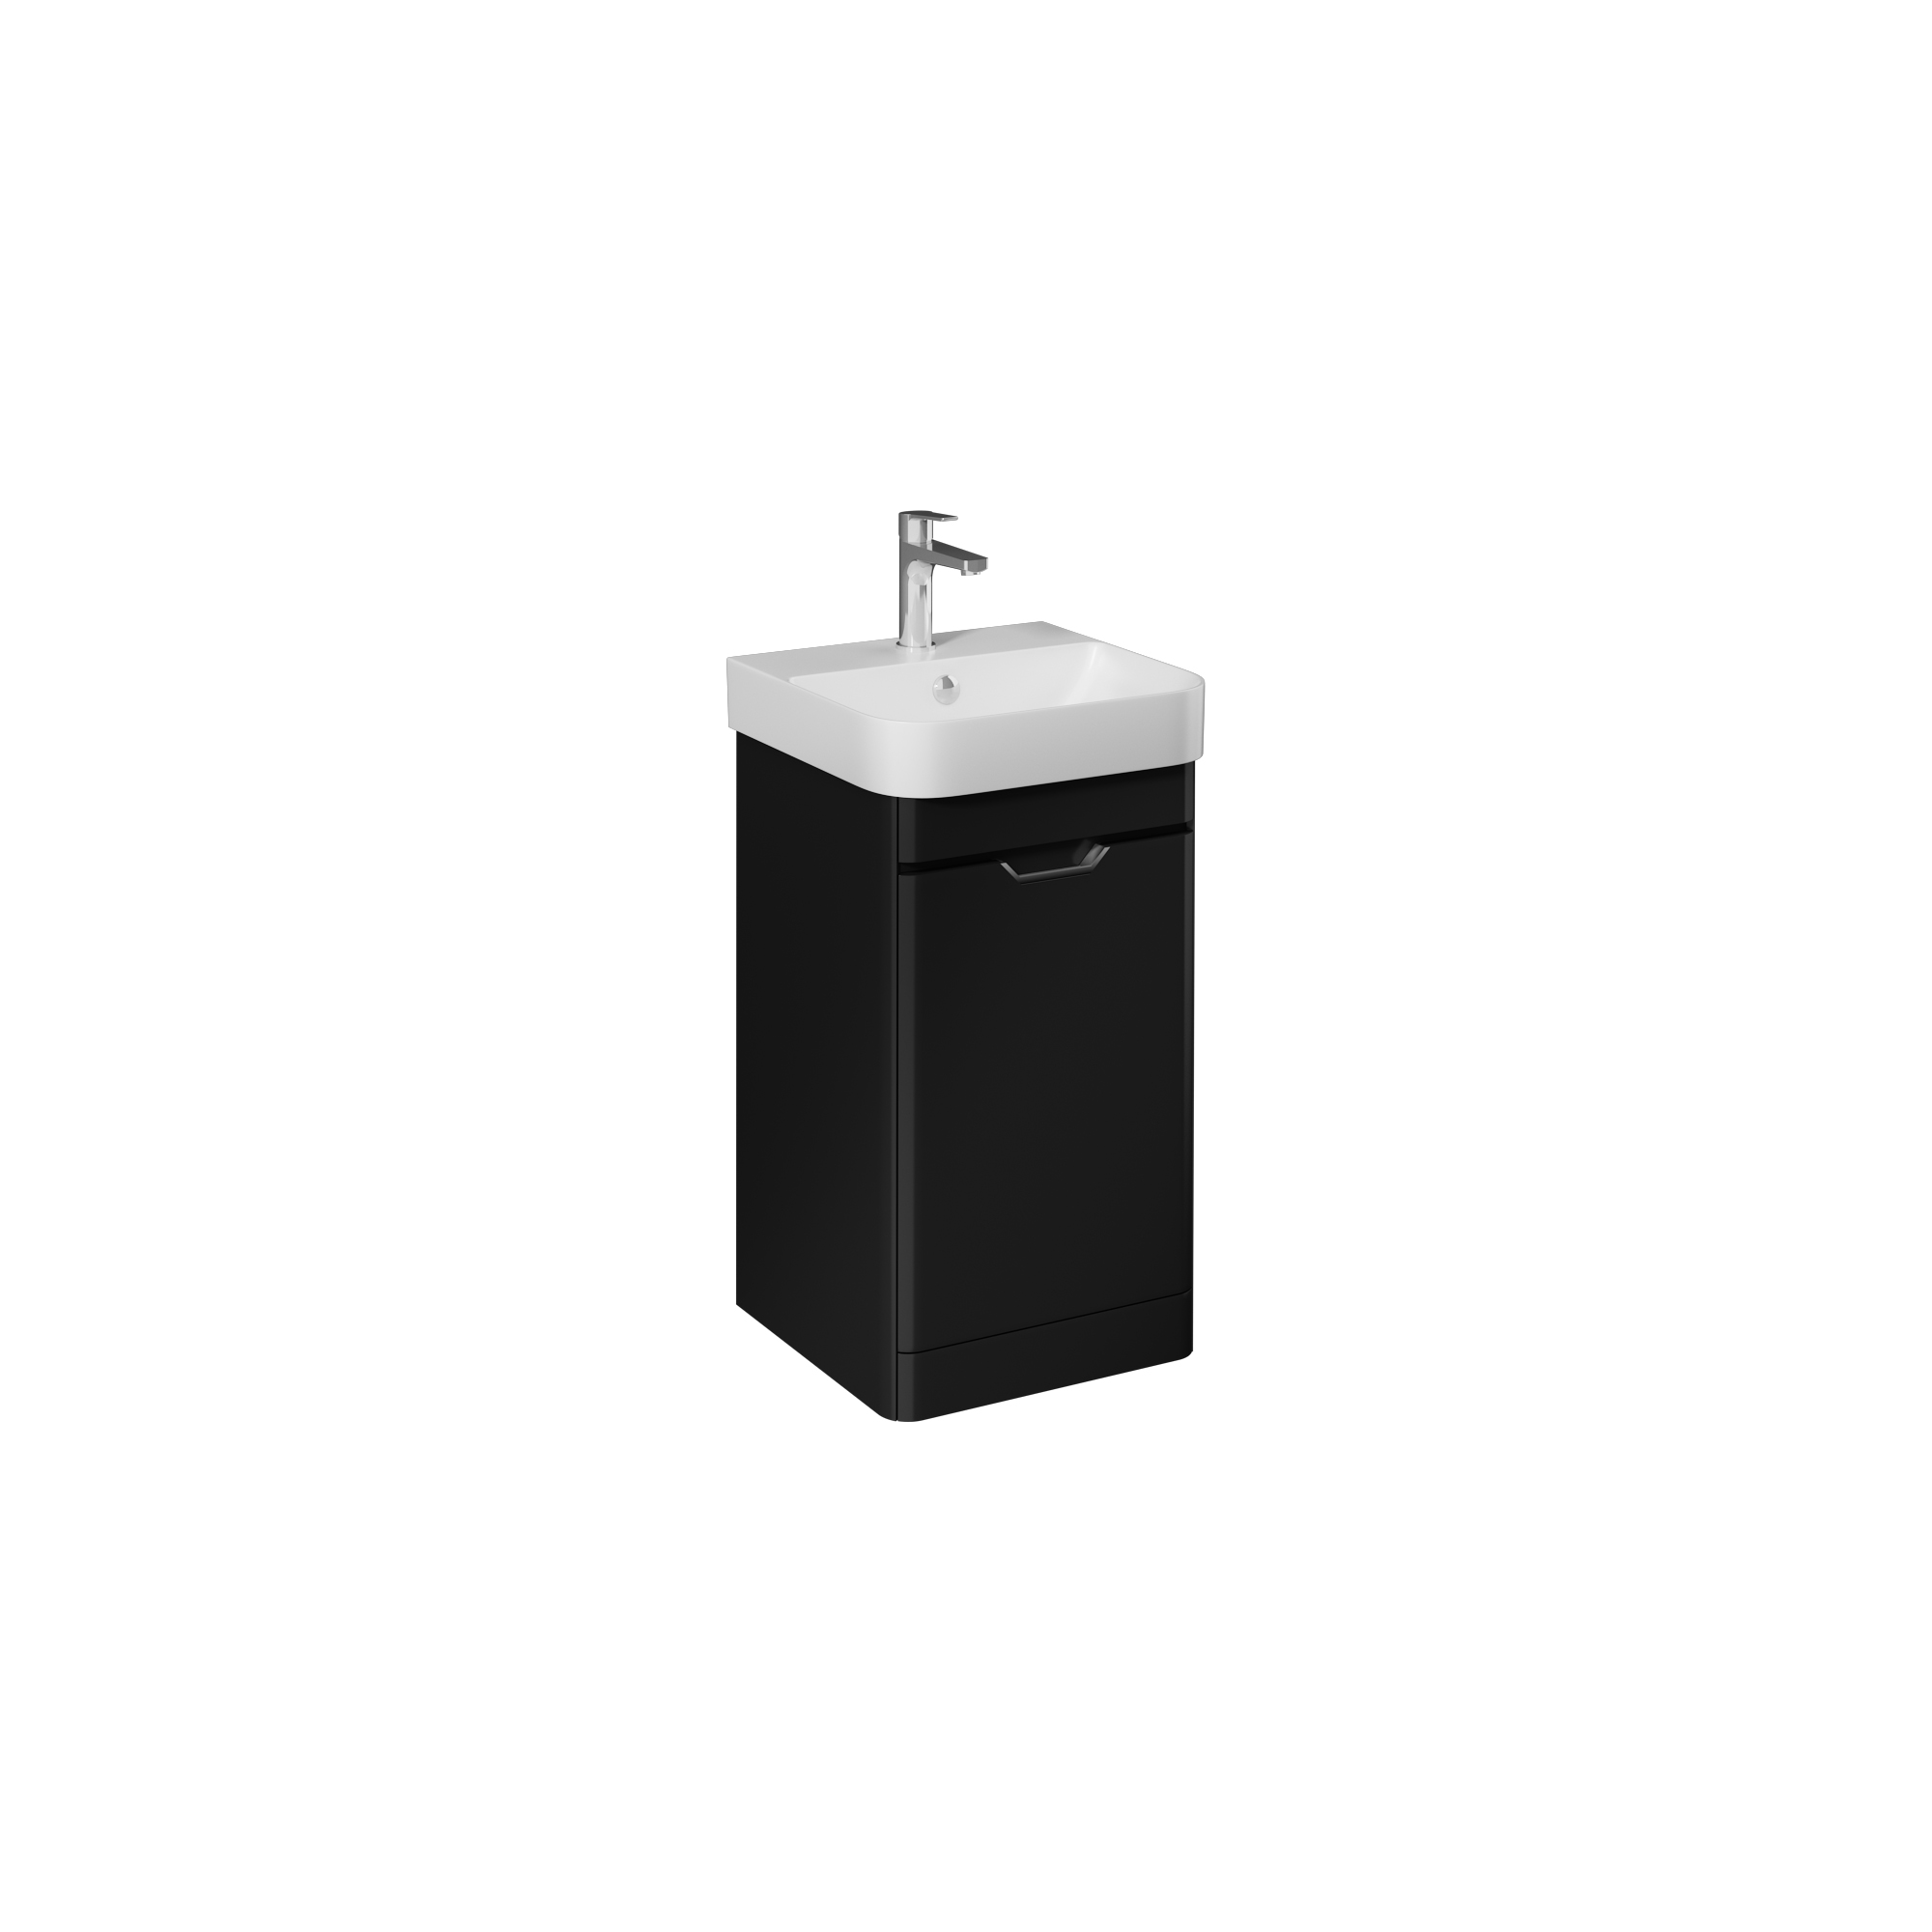 Fonte Washbasin Cabinet Right, Red 48 cm